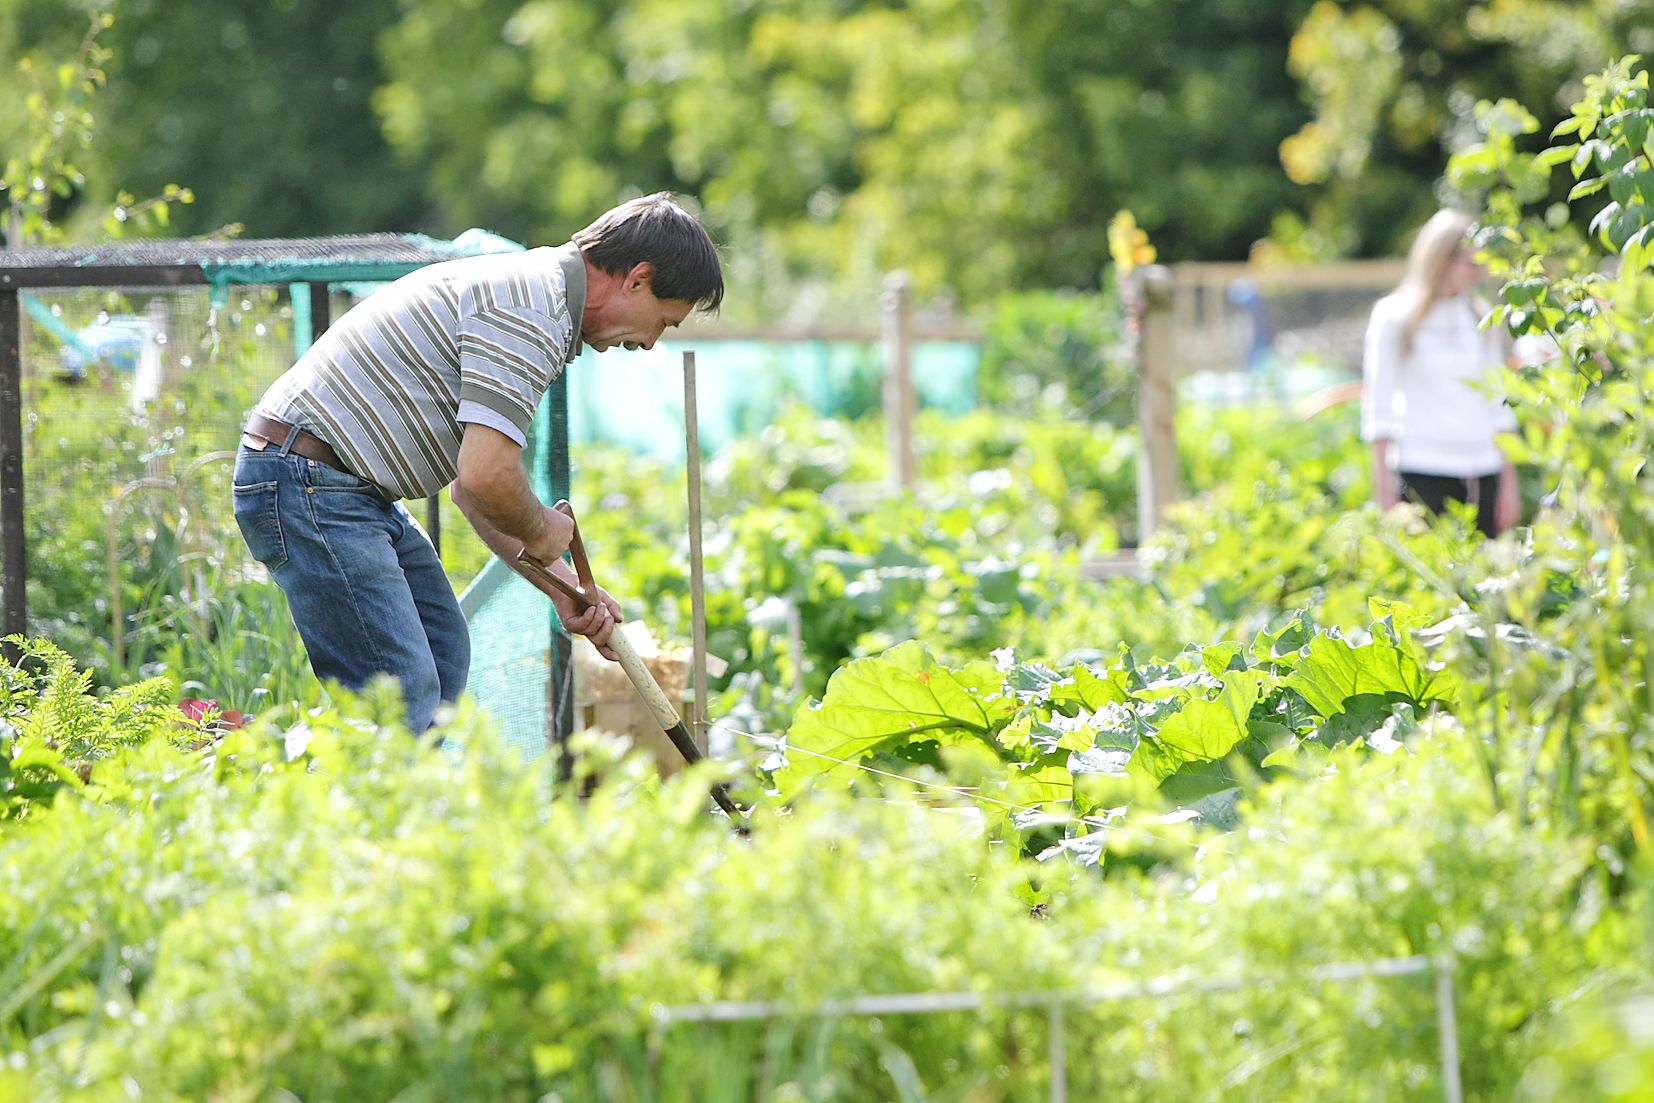 GREEN FINGERS: Colin allotments are a great example of community cohesion